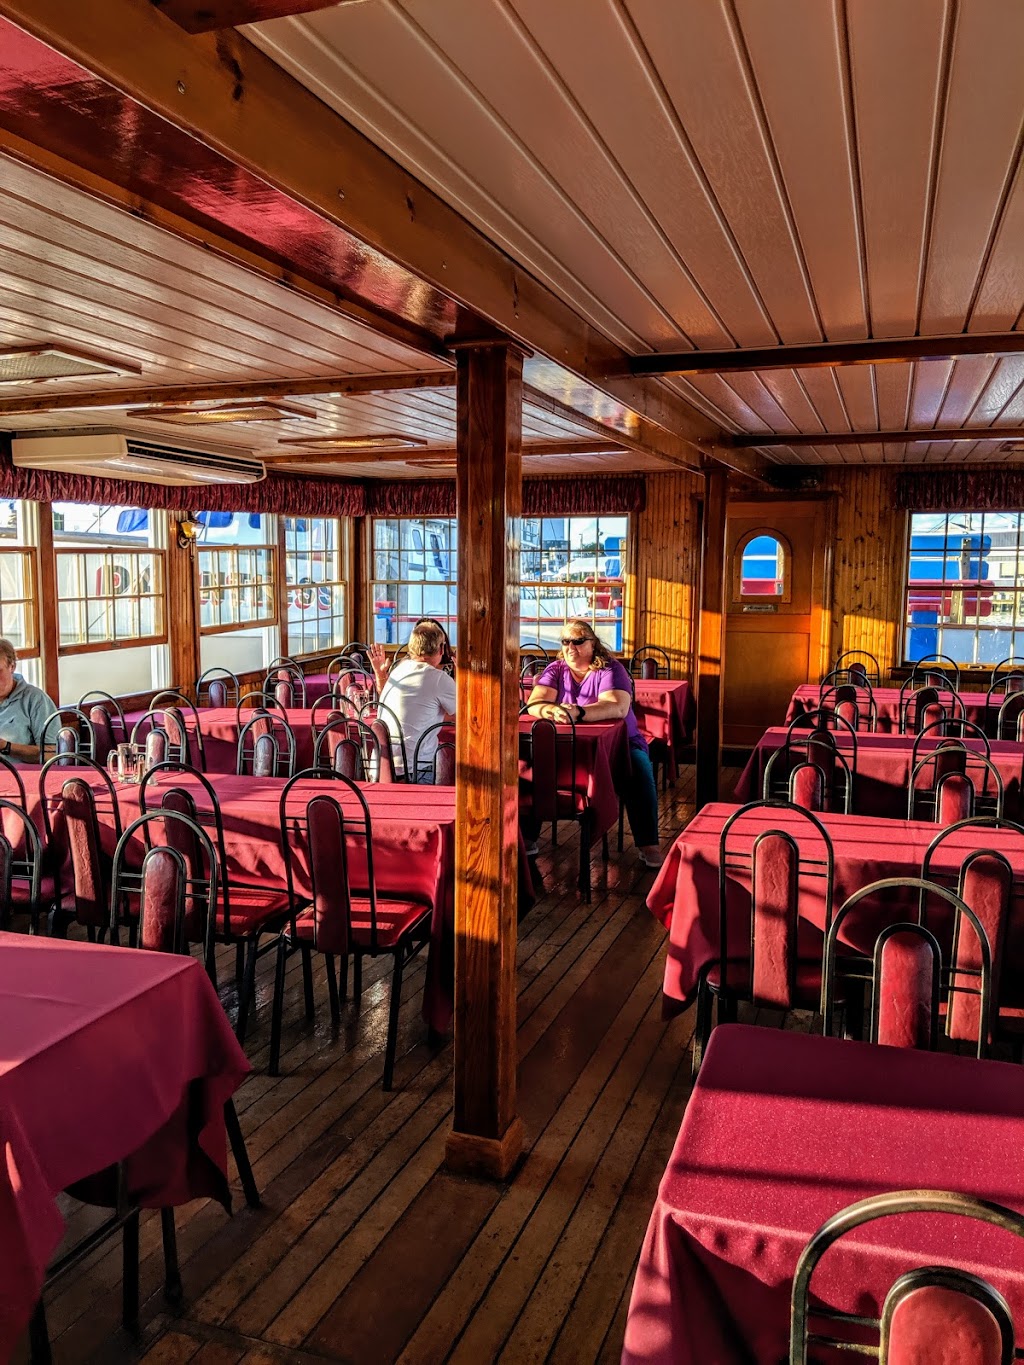 River Queen Public Cruise and Dinner Boat | 800 Ashley Ave, Brielle, NJ 08730 | Phone: (732) 528-6620